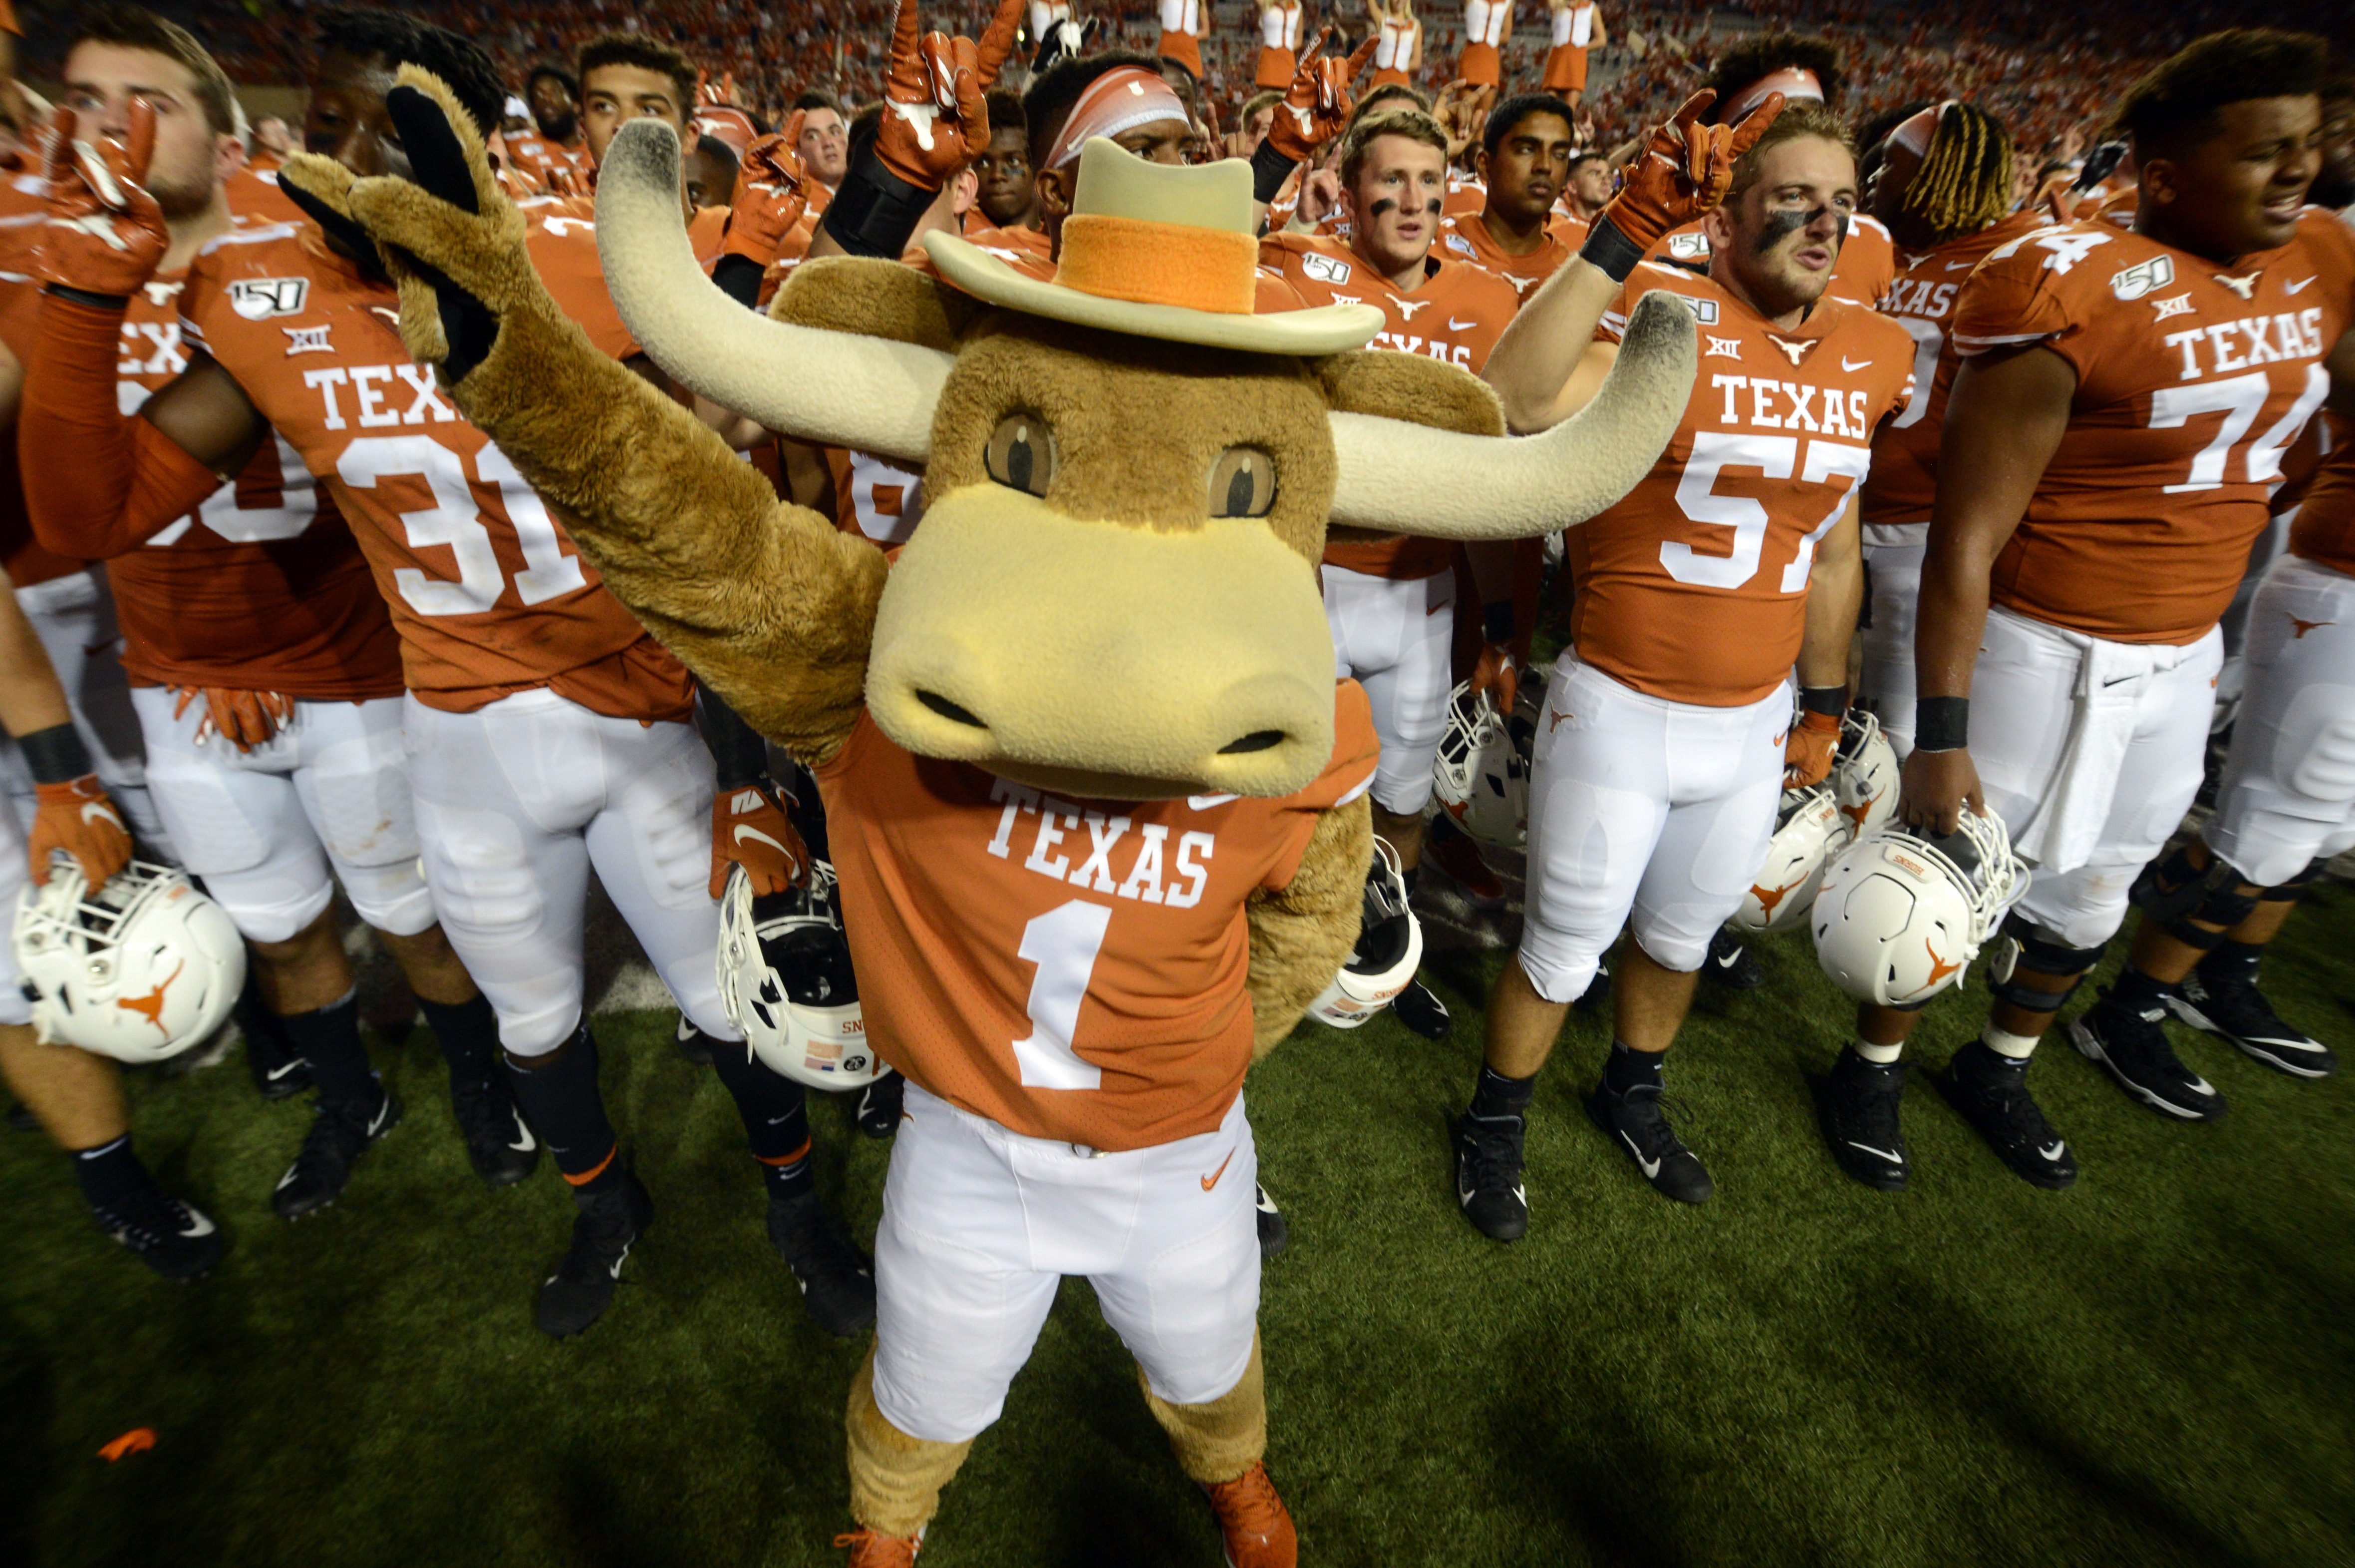 Wealthy UT Donors Threaten to Pull Support Over Removal of “The Eyes of Texas” Fight Song